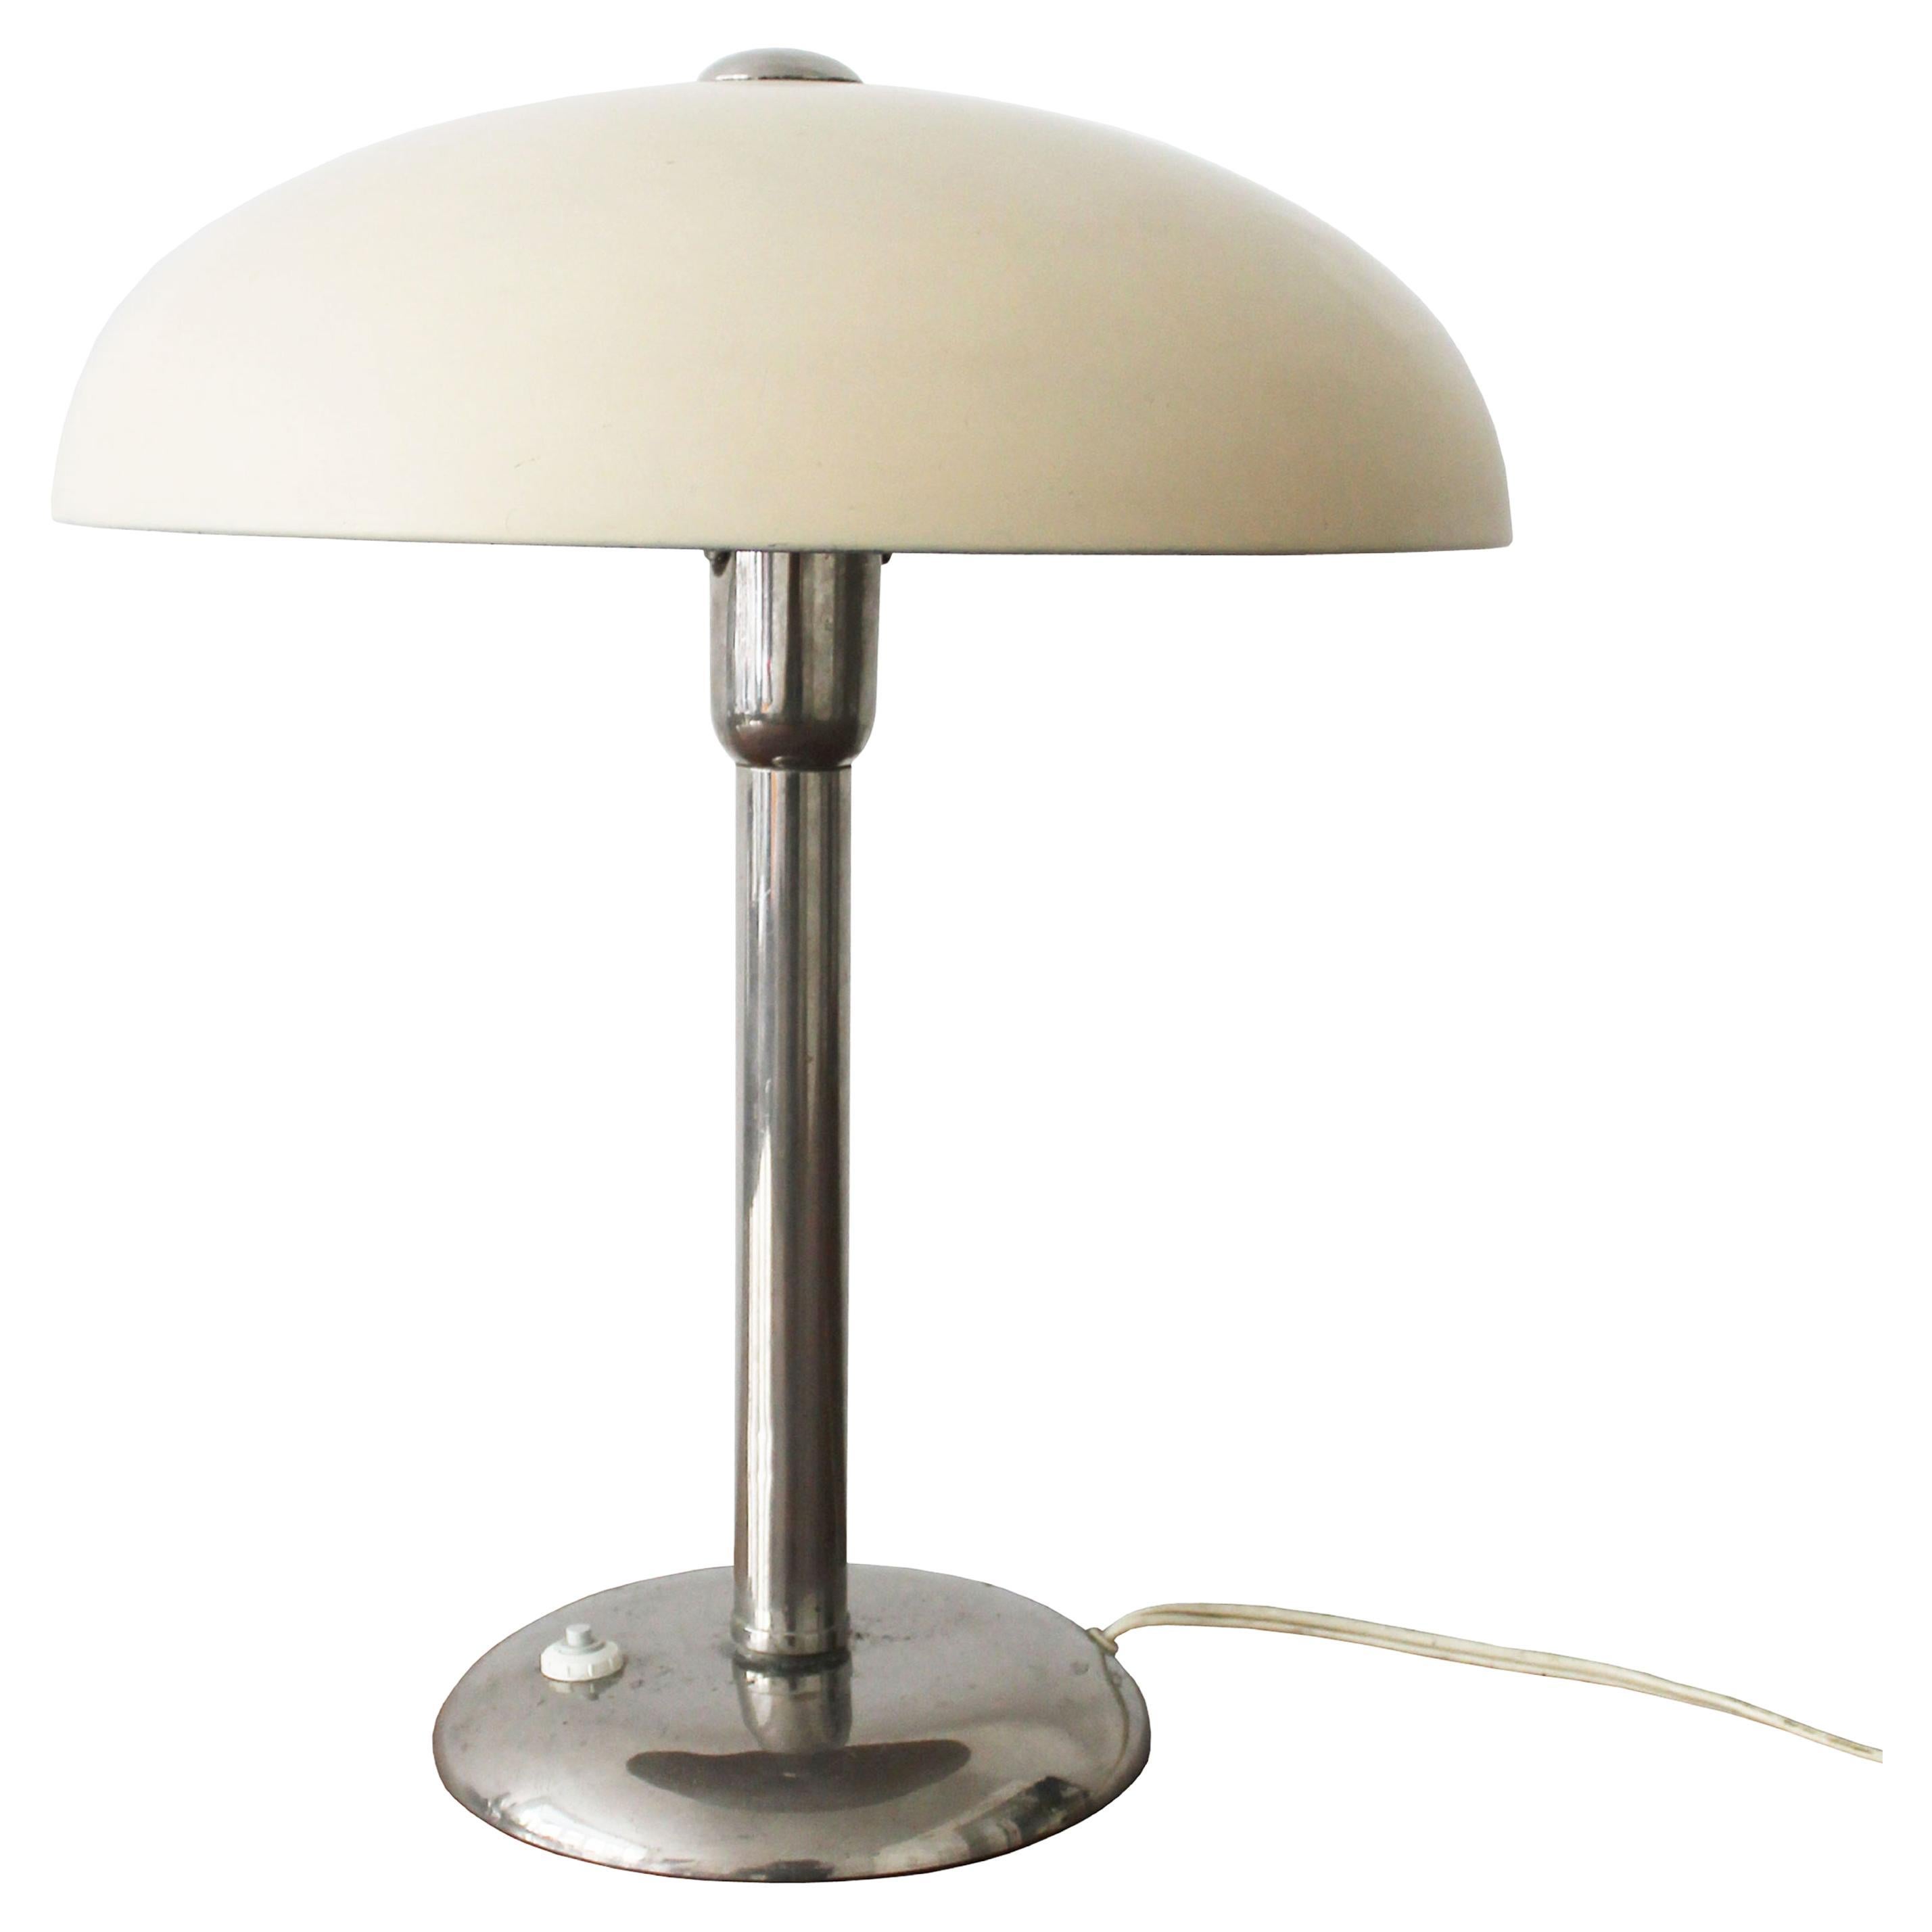 1930's Bauhaus Table Lamp For Sale